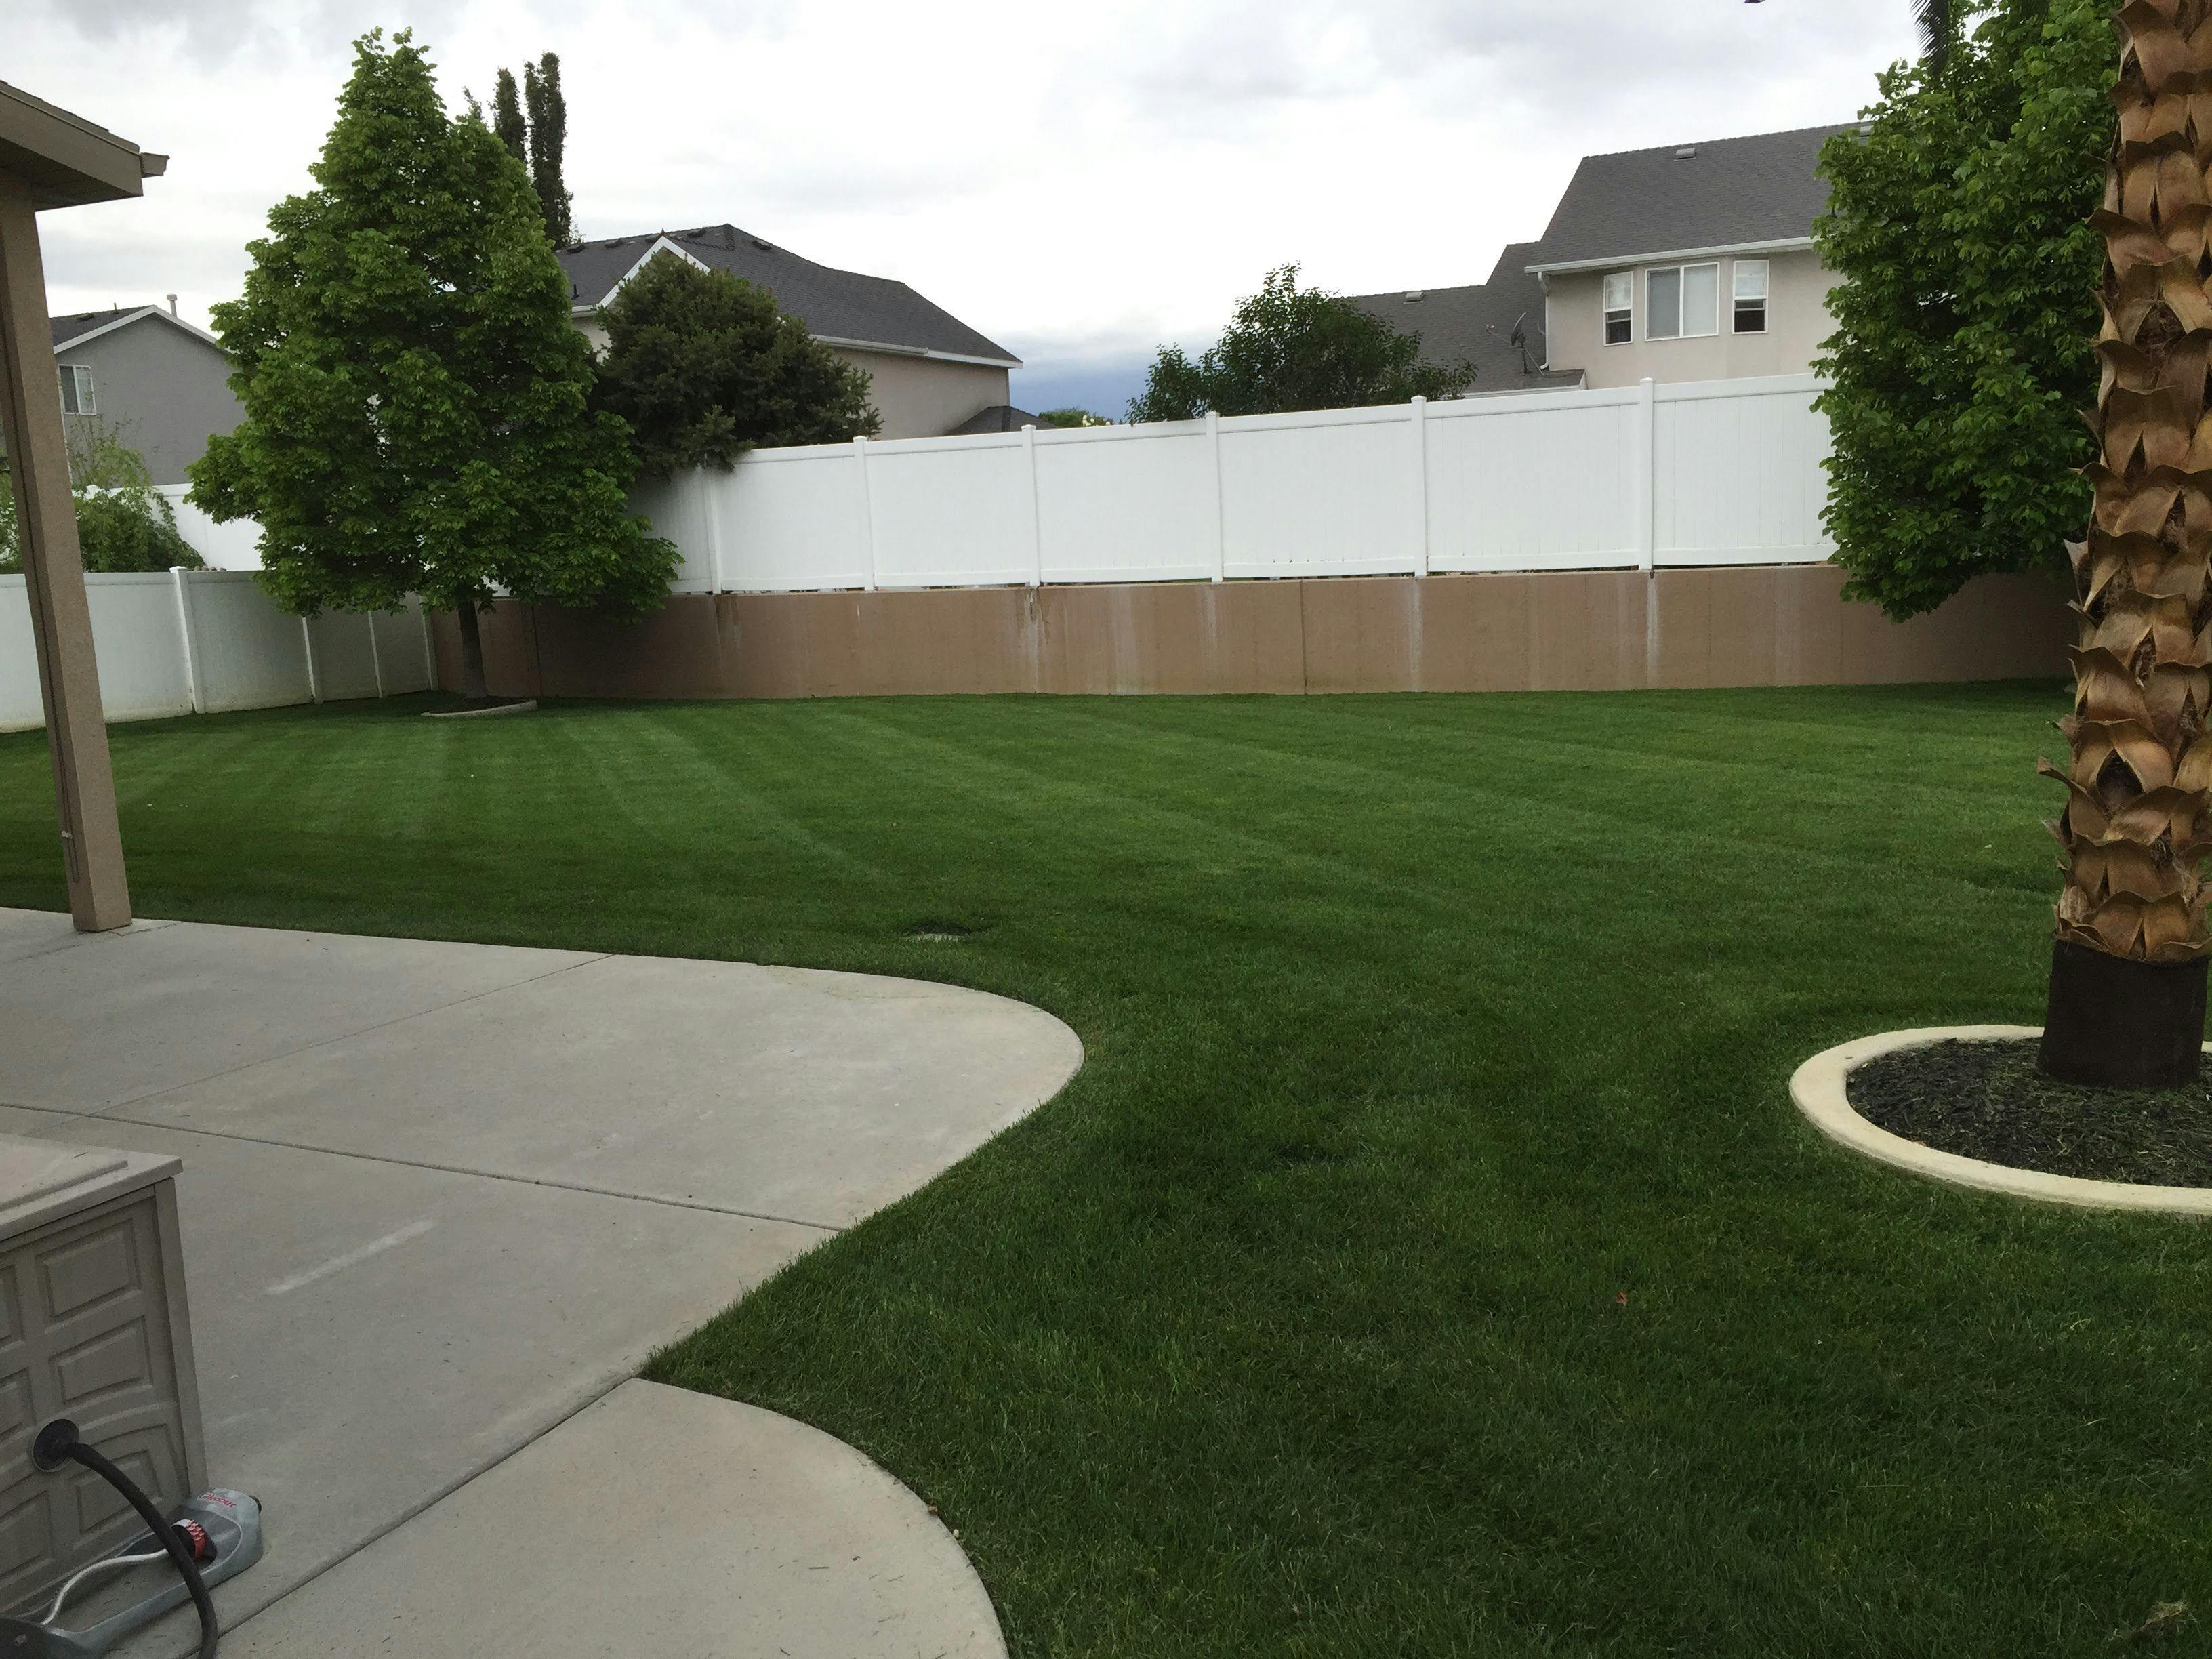 Backyard of a residential property with primary focus on the deep green color of their large lawn.